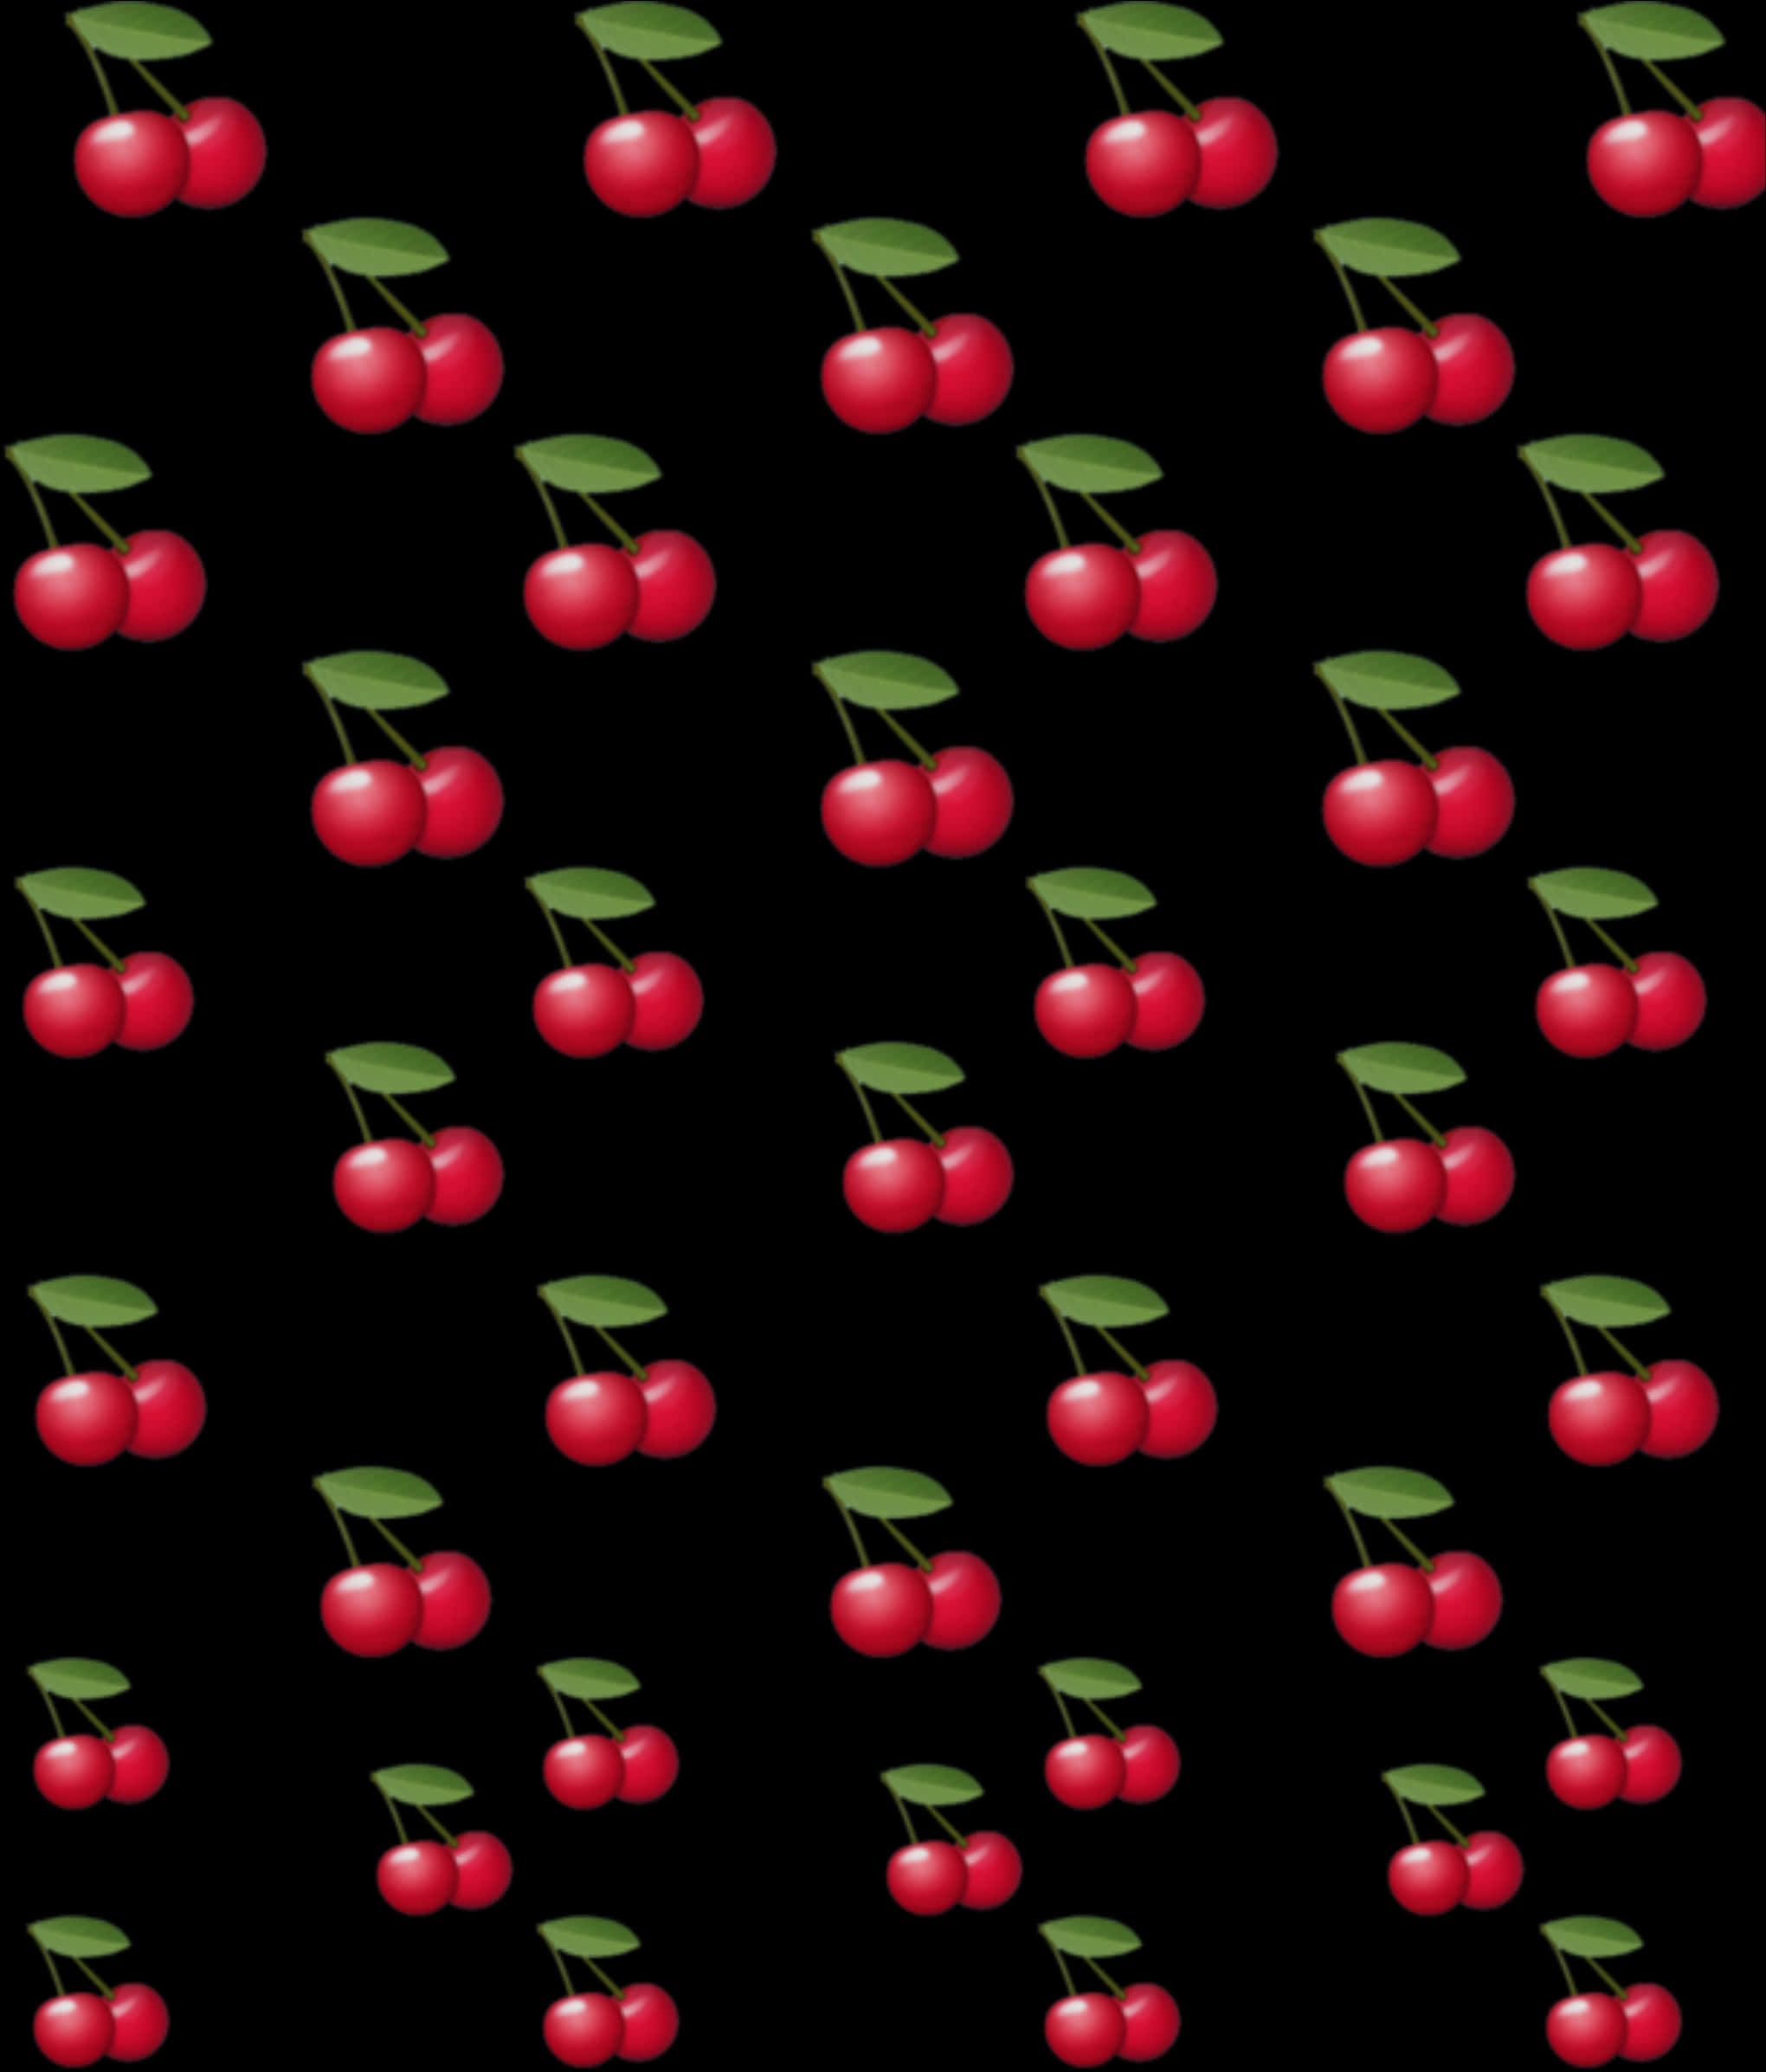 A Pattern Of Red Cherries